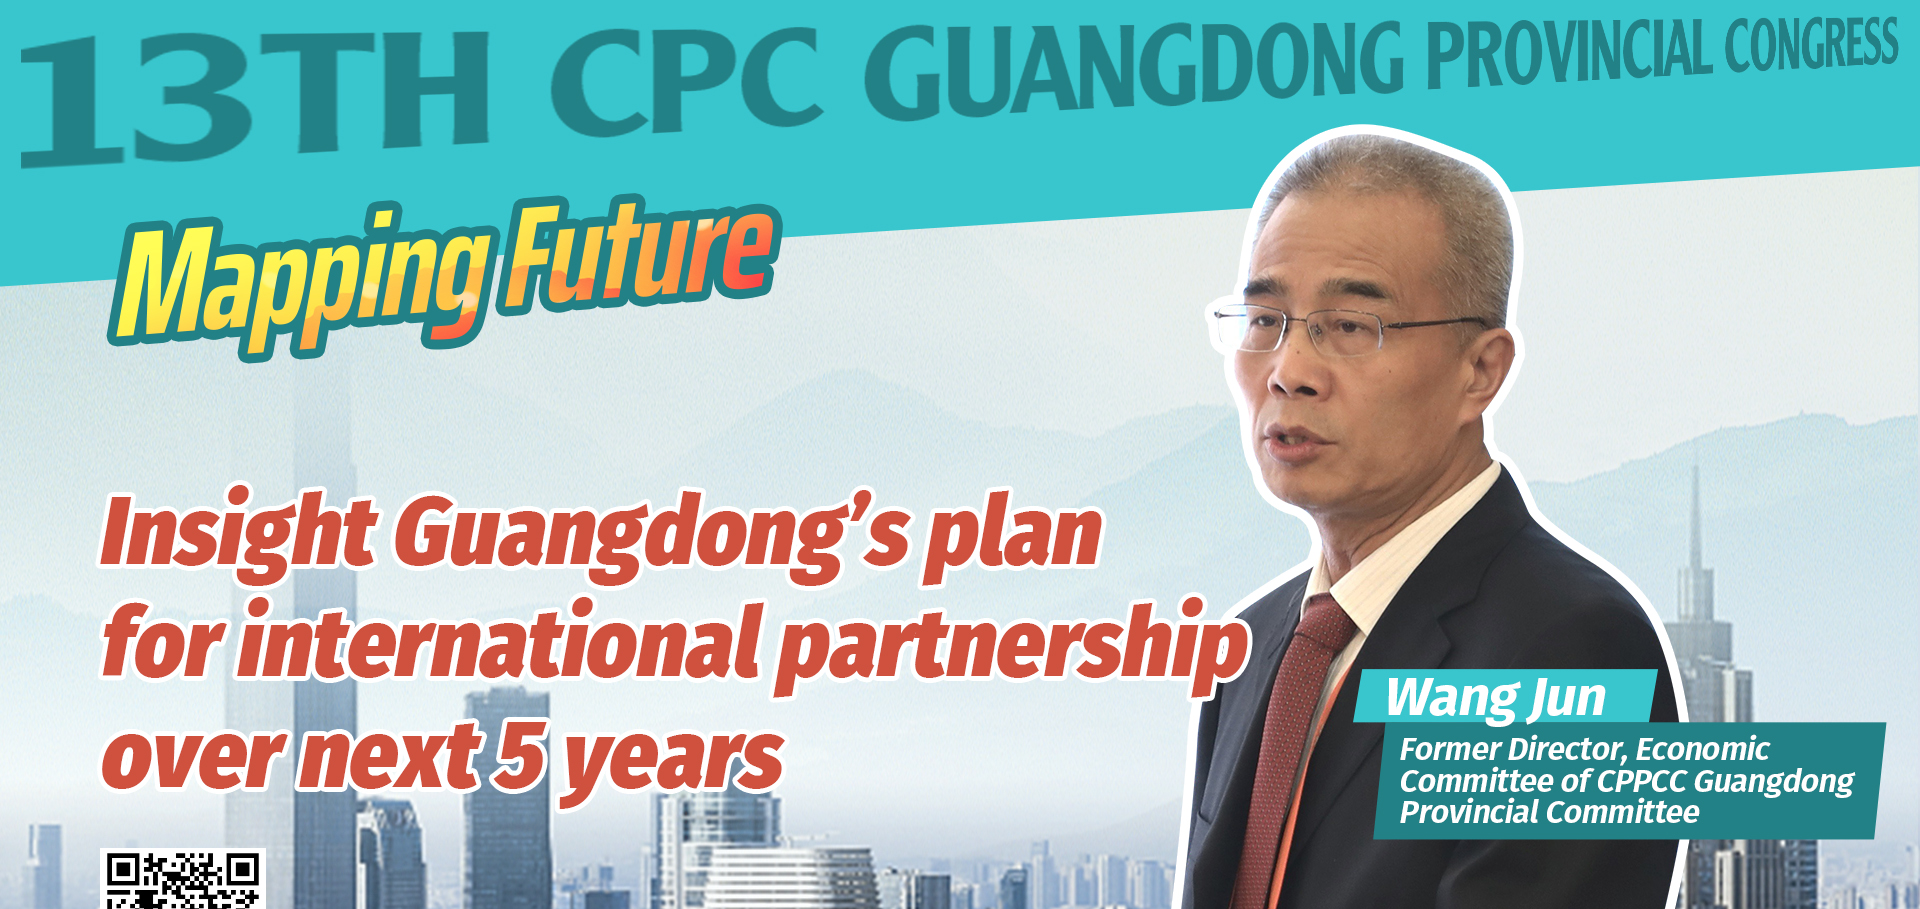 Insight Guangdong’s plan for international partnership over next 5 years